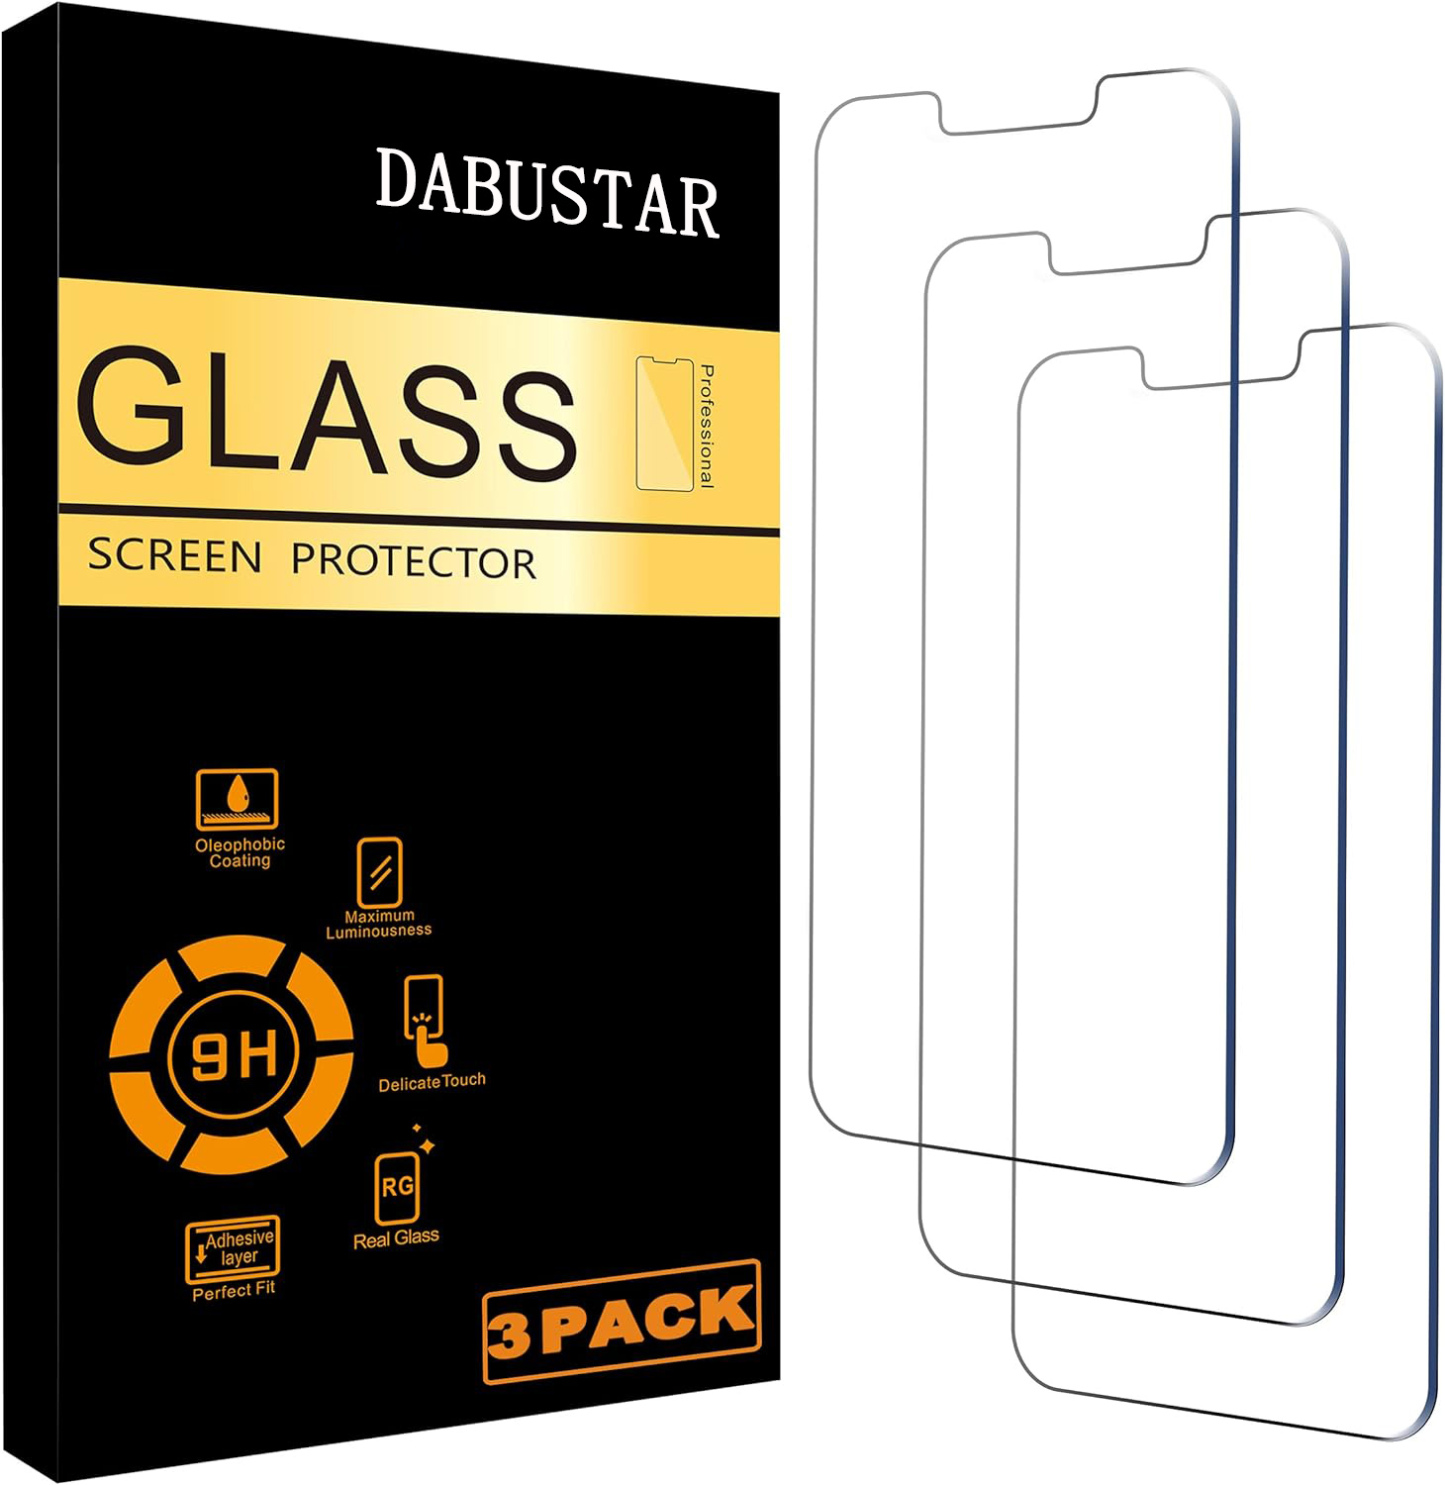 DABUSTAR Protective films adapted for smartphones Glass Screen Protector for iPhone 14 / iPhone 13 / iPhone 13 Pro [6.1 Inch] Display 3 Pack Tempered Glass, Case Friendly